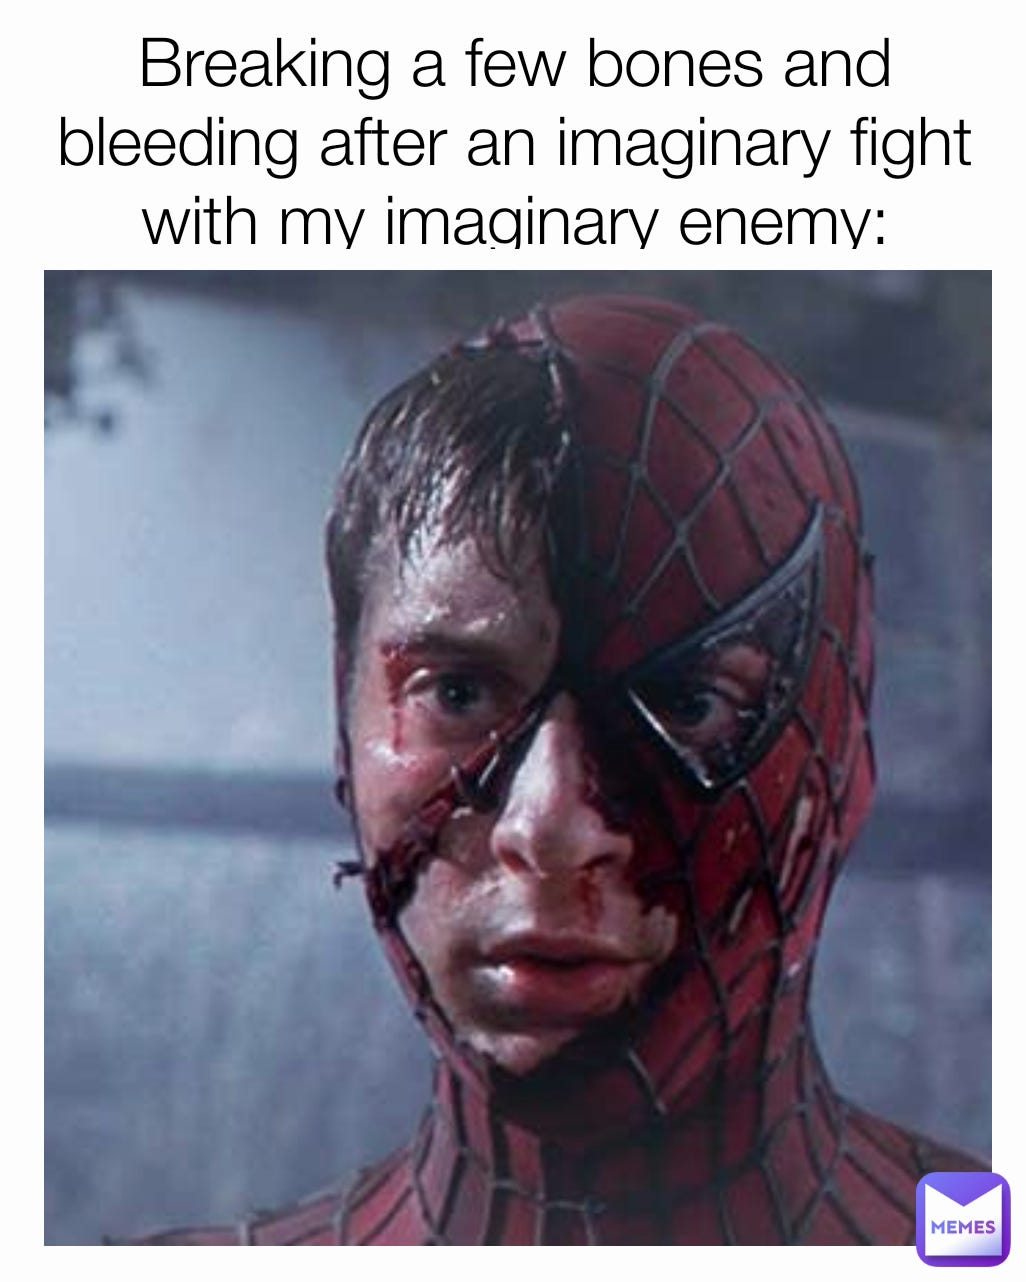 image of spider man with mask half off that says breaking bones and bleeding after fighting my imaginary enemy